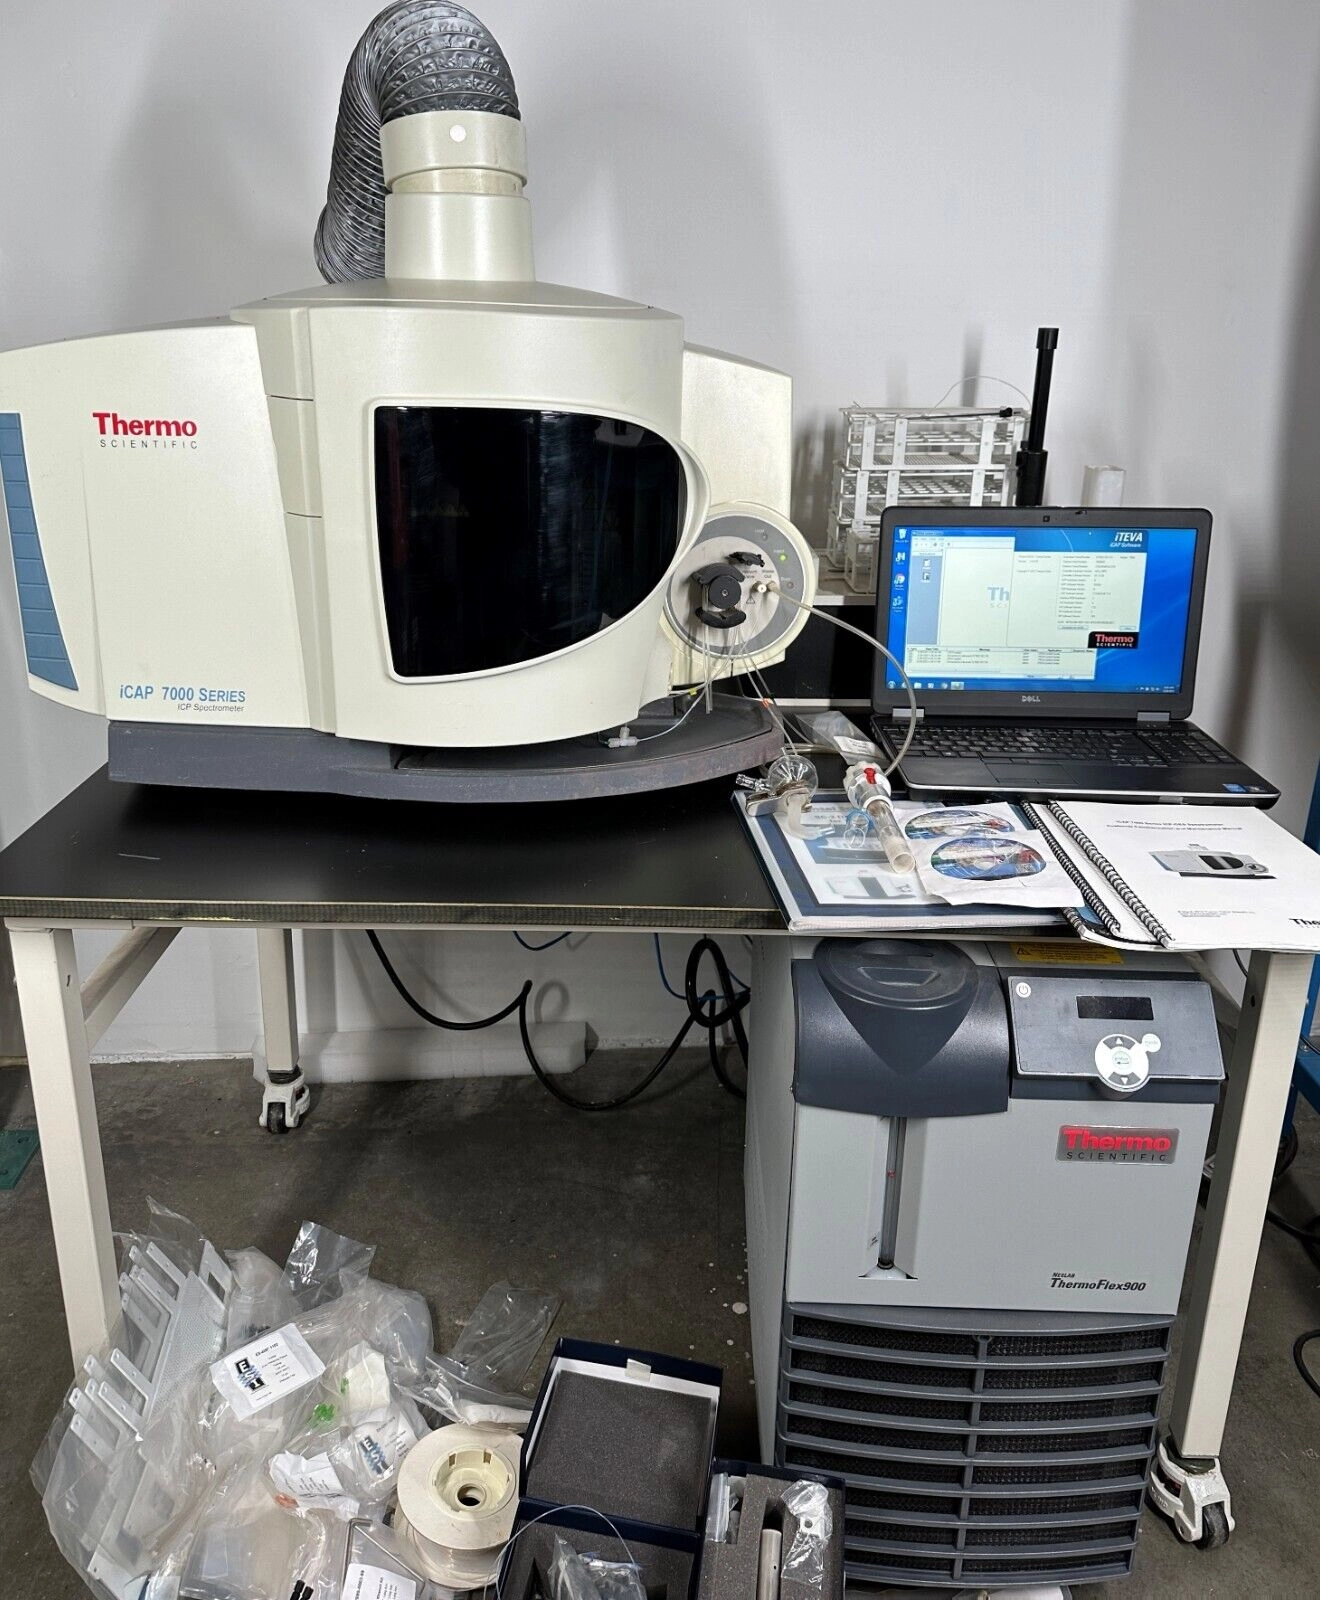 Thermo ICAP 7600 Duo ICP OES Spectrometer with chi